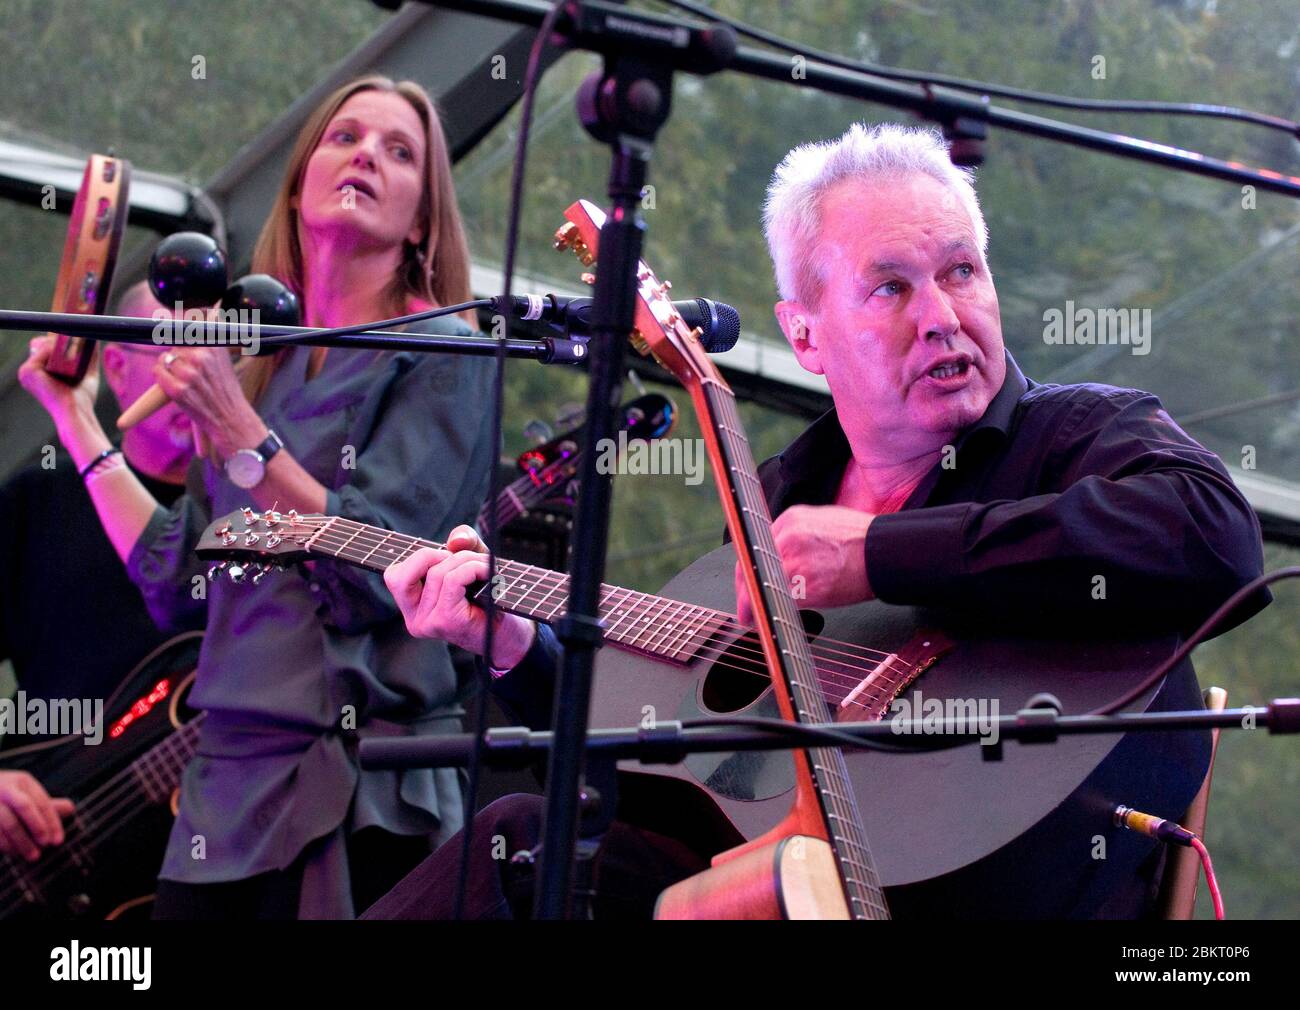 British progressive rock/ folk band Comus perform at the Moseley Folk Festival. Bobbie Watson standing with percussin and Roger Wootton seated with guitar. 5th September 2009 Stock Photo